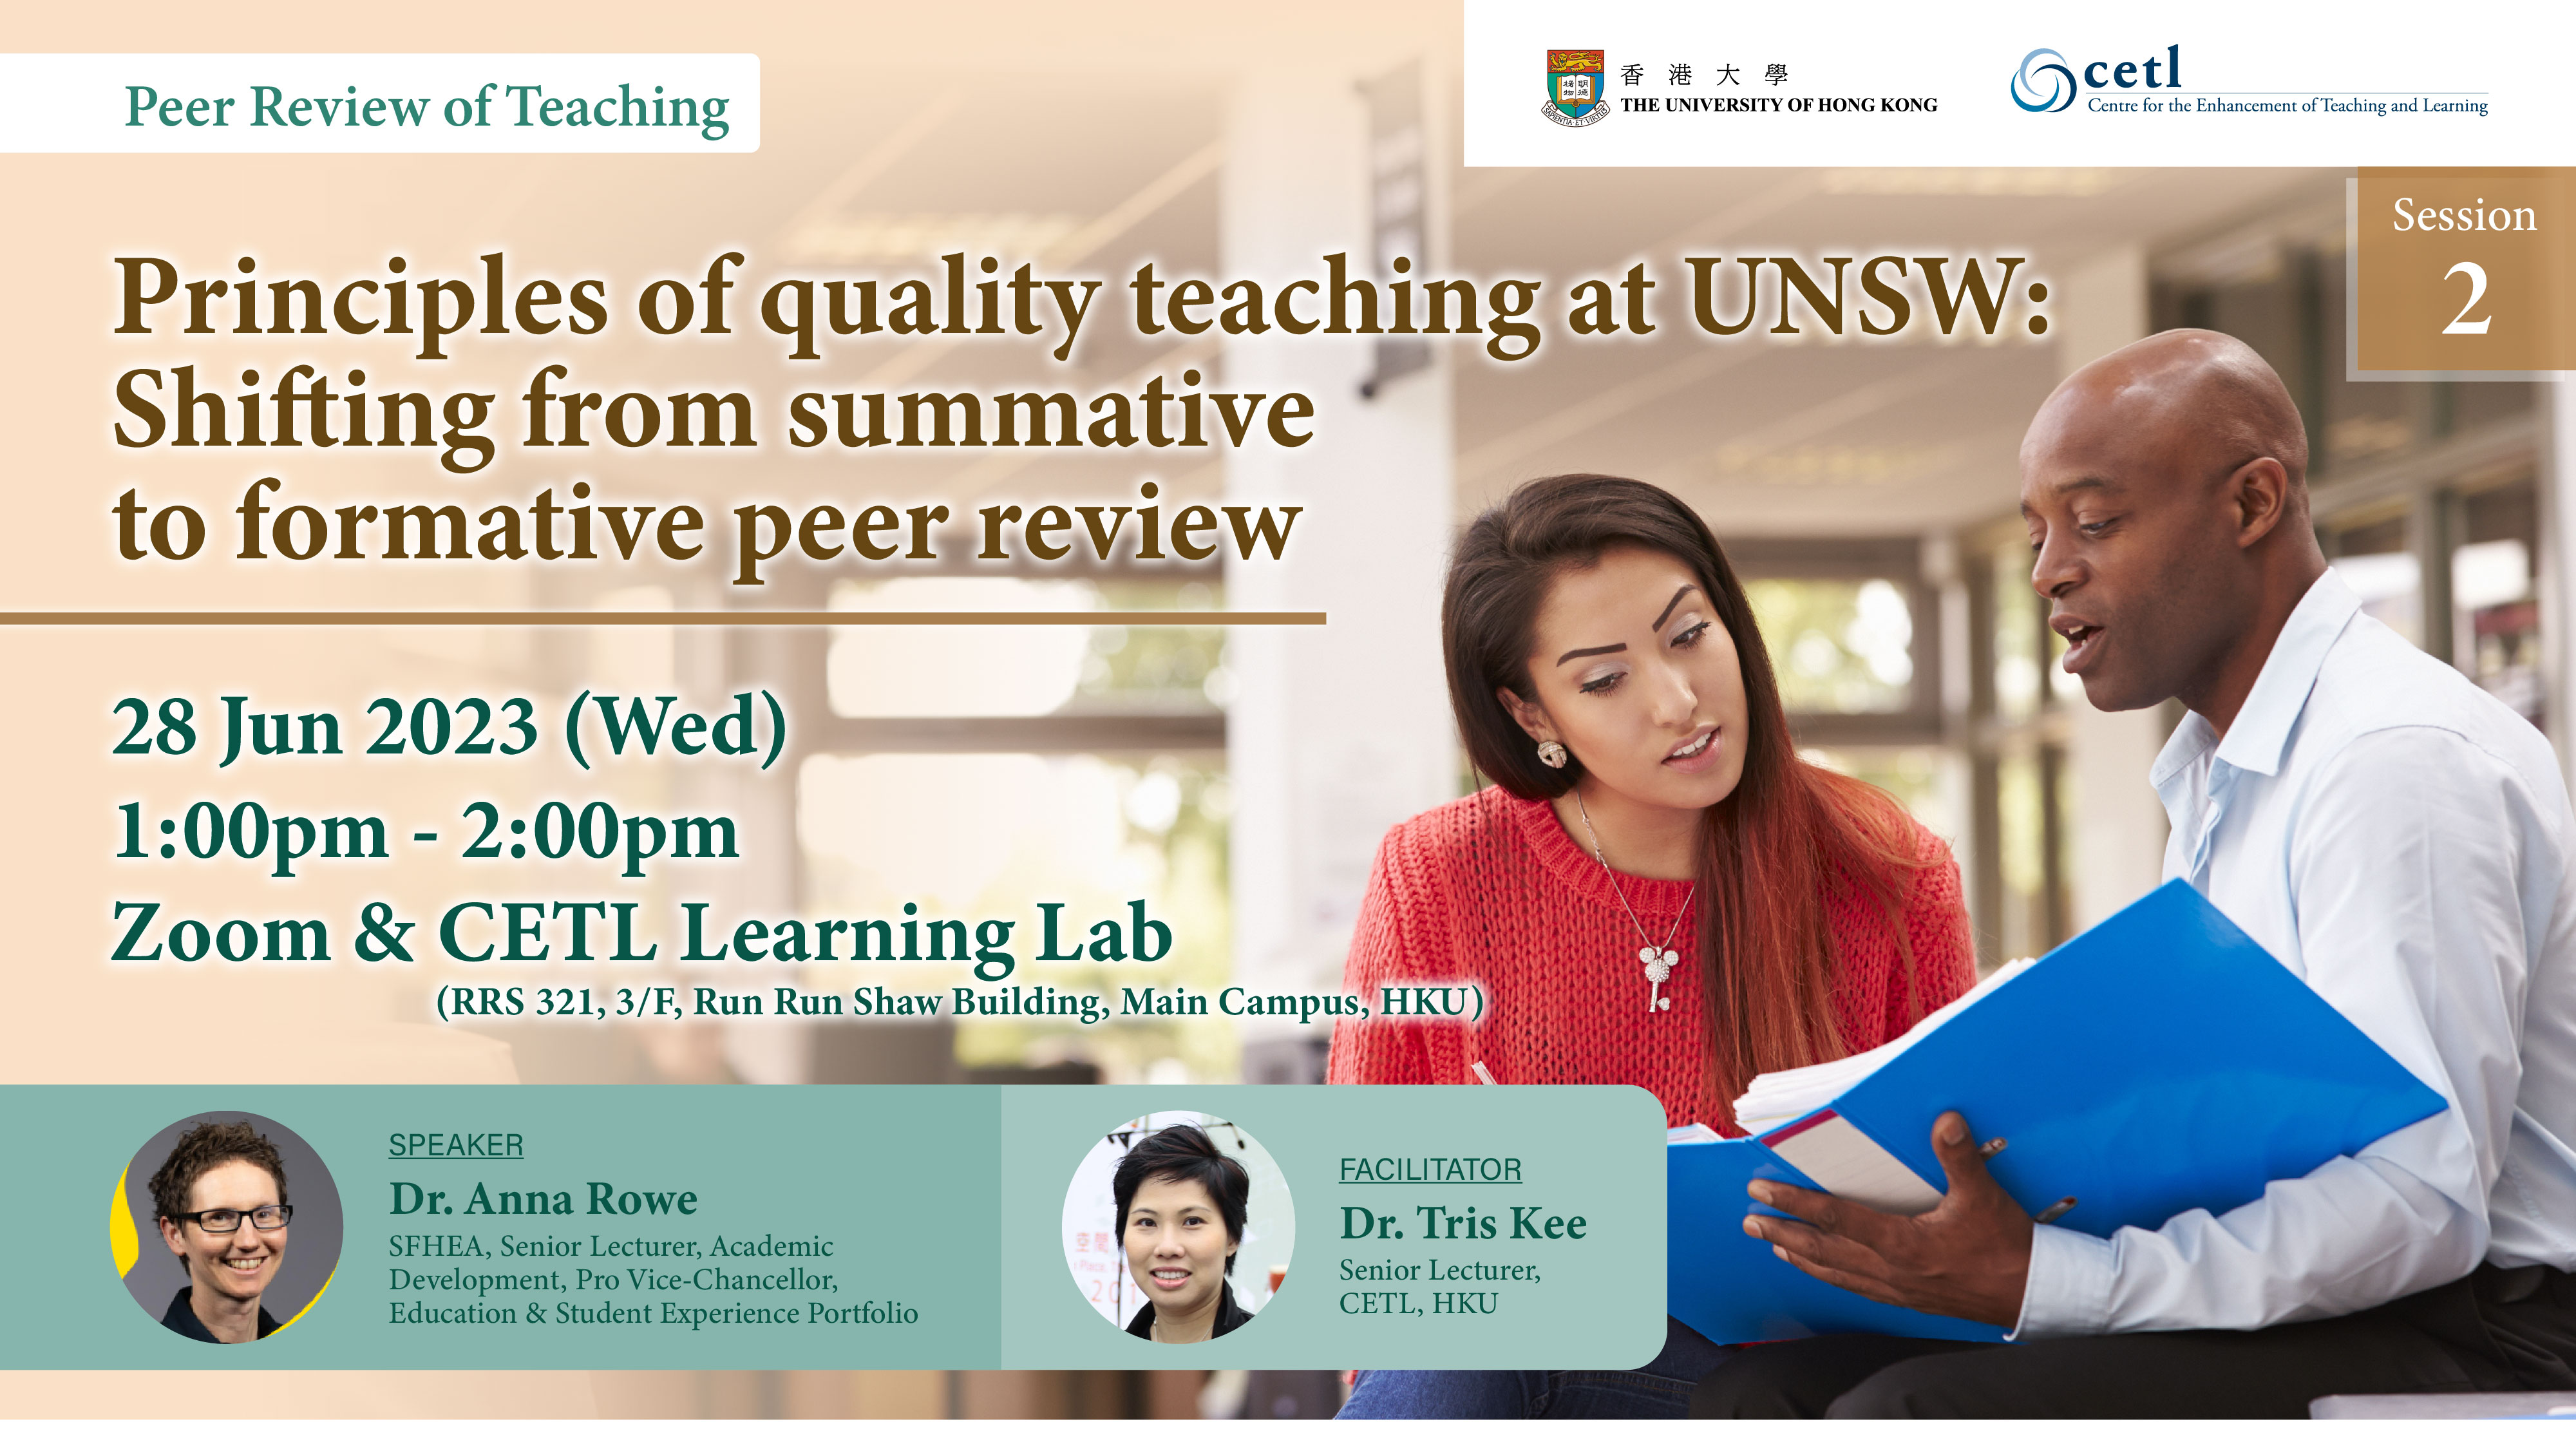 Session 2 | Principles of quality teaching at UNSW: Shifting from summative to formative peer review